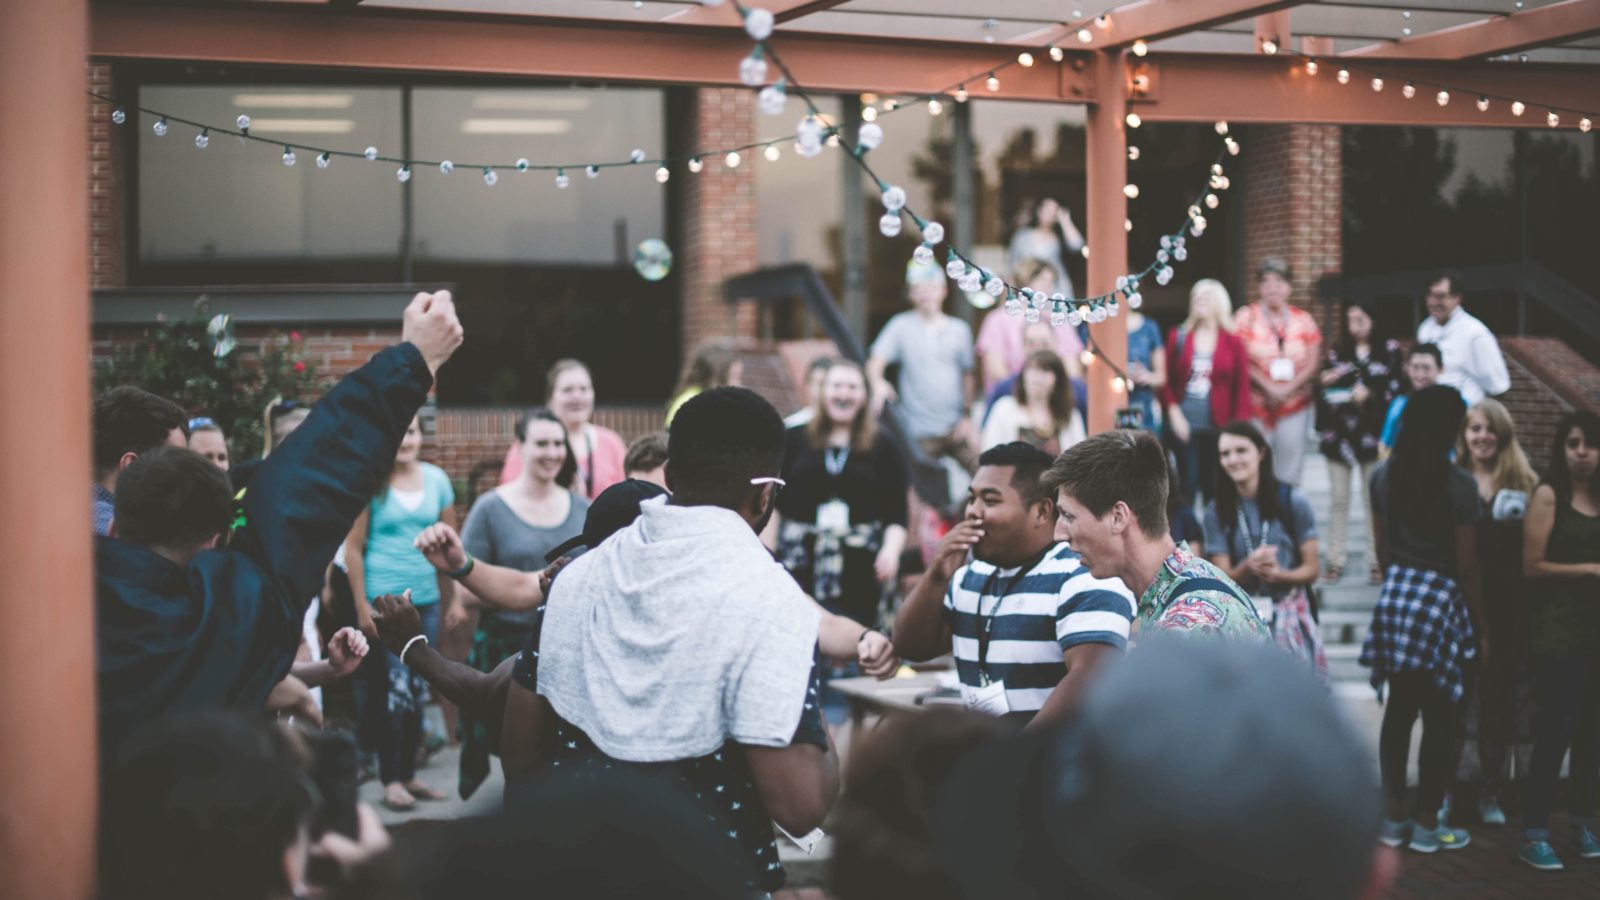 Enjoy this list of proven nonprofit event ideas. In this image, a group of adults are having a great time in an outdoor restaurant setting.